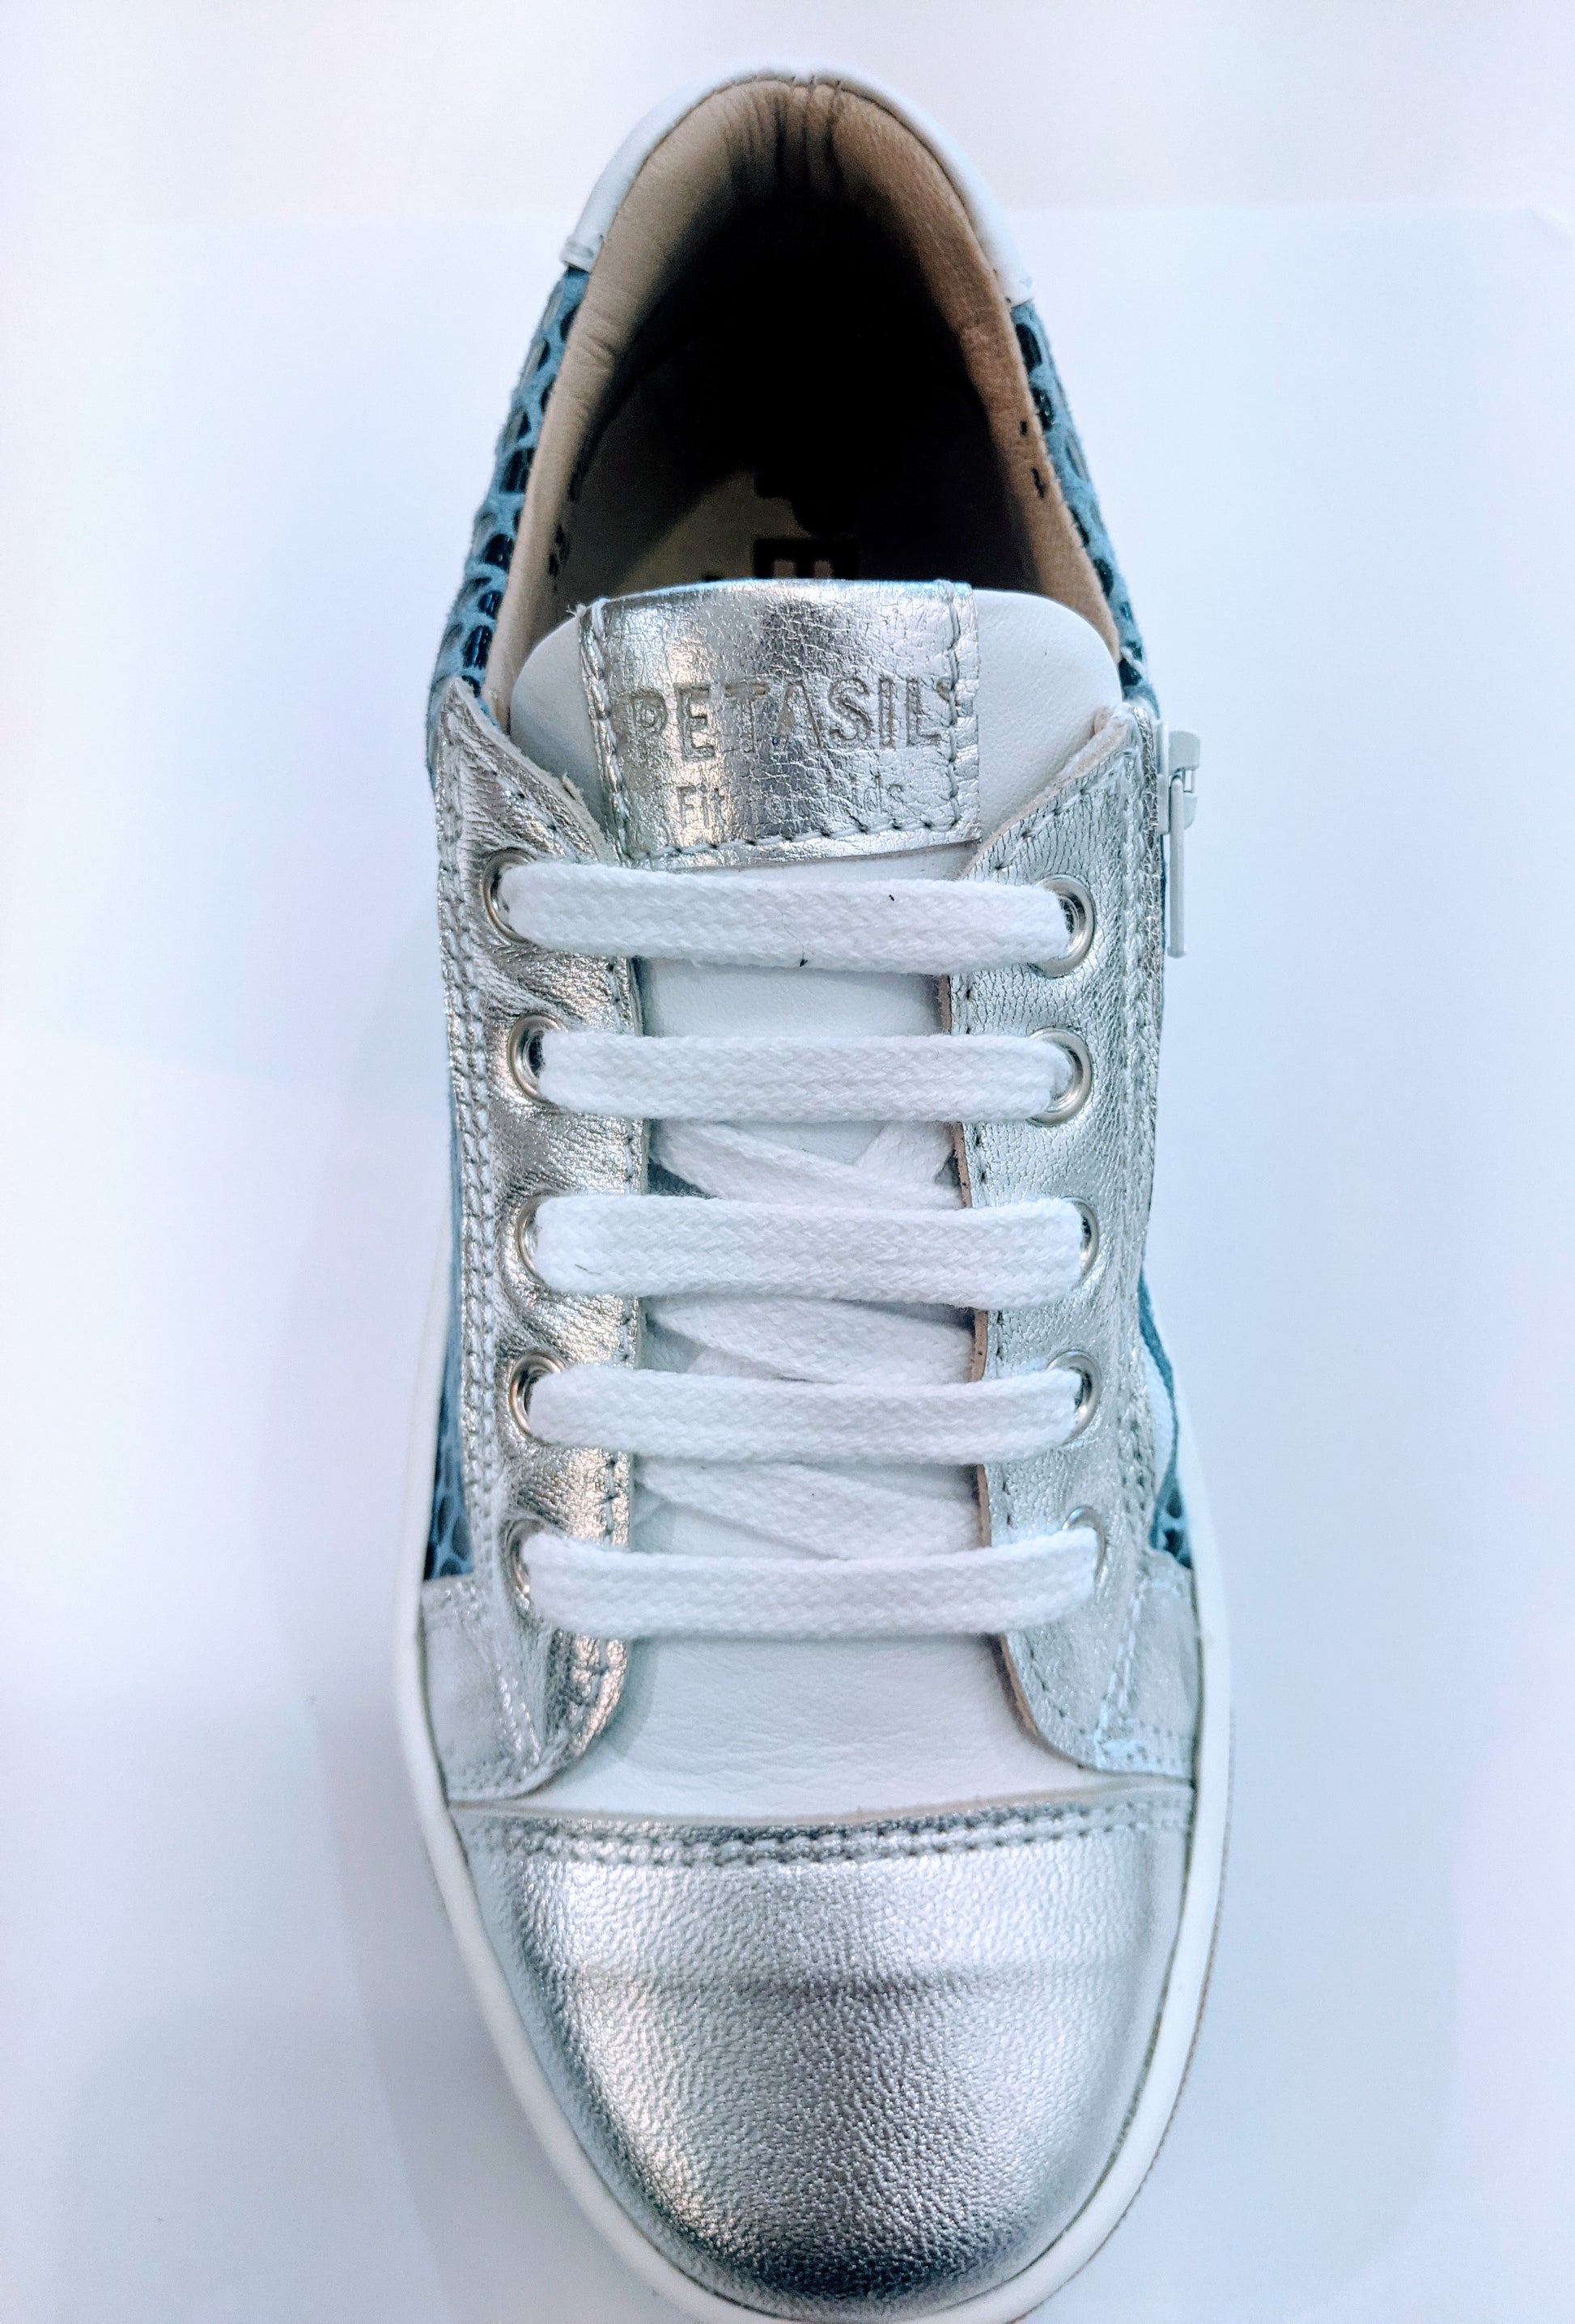 A girls casual trainer by Petasil ,style Annie, in silver and blue with zip and lace fastening. Above view.